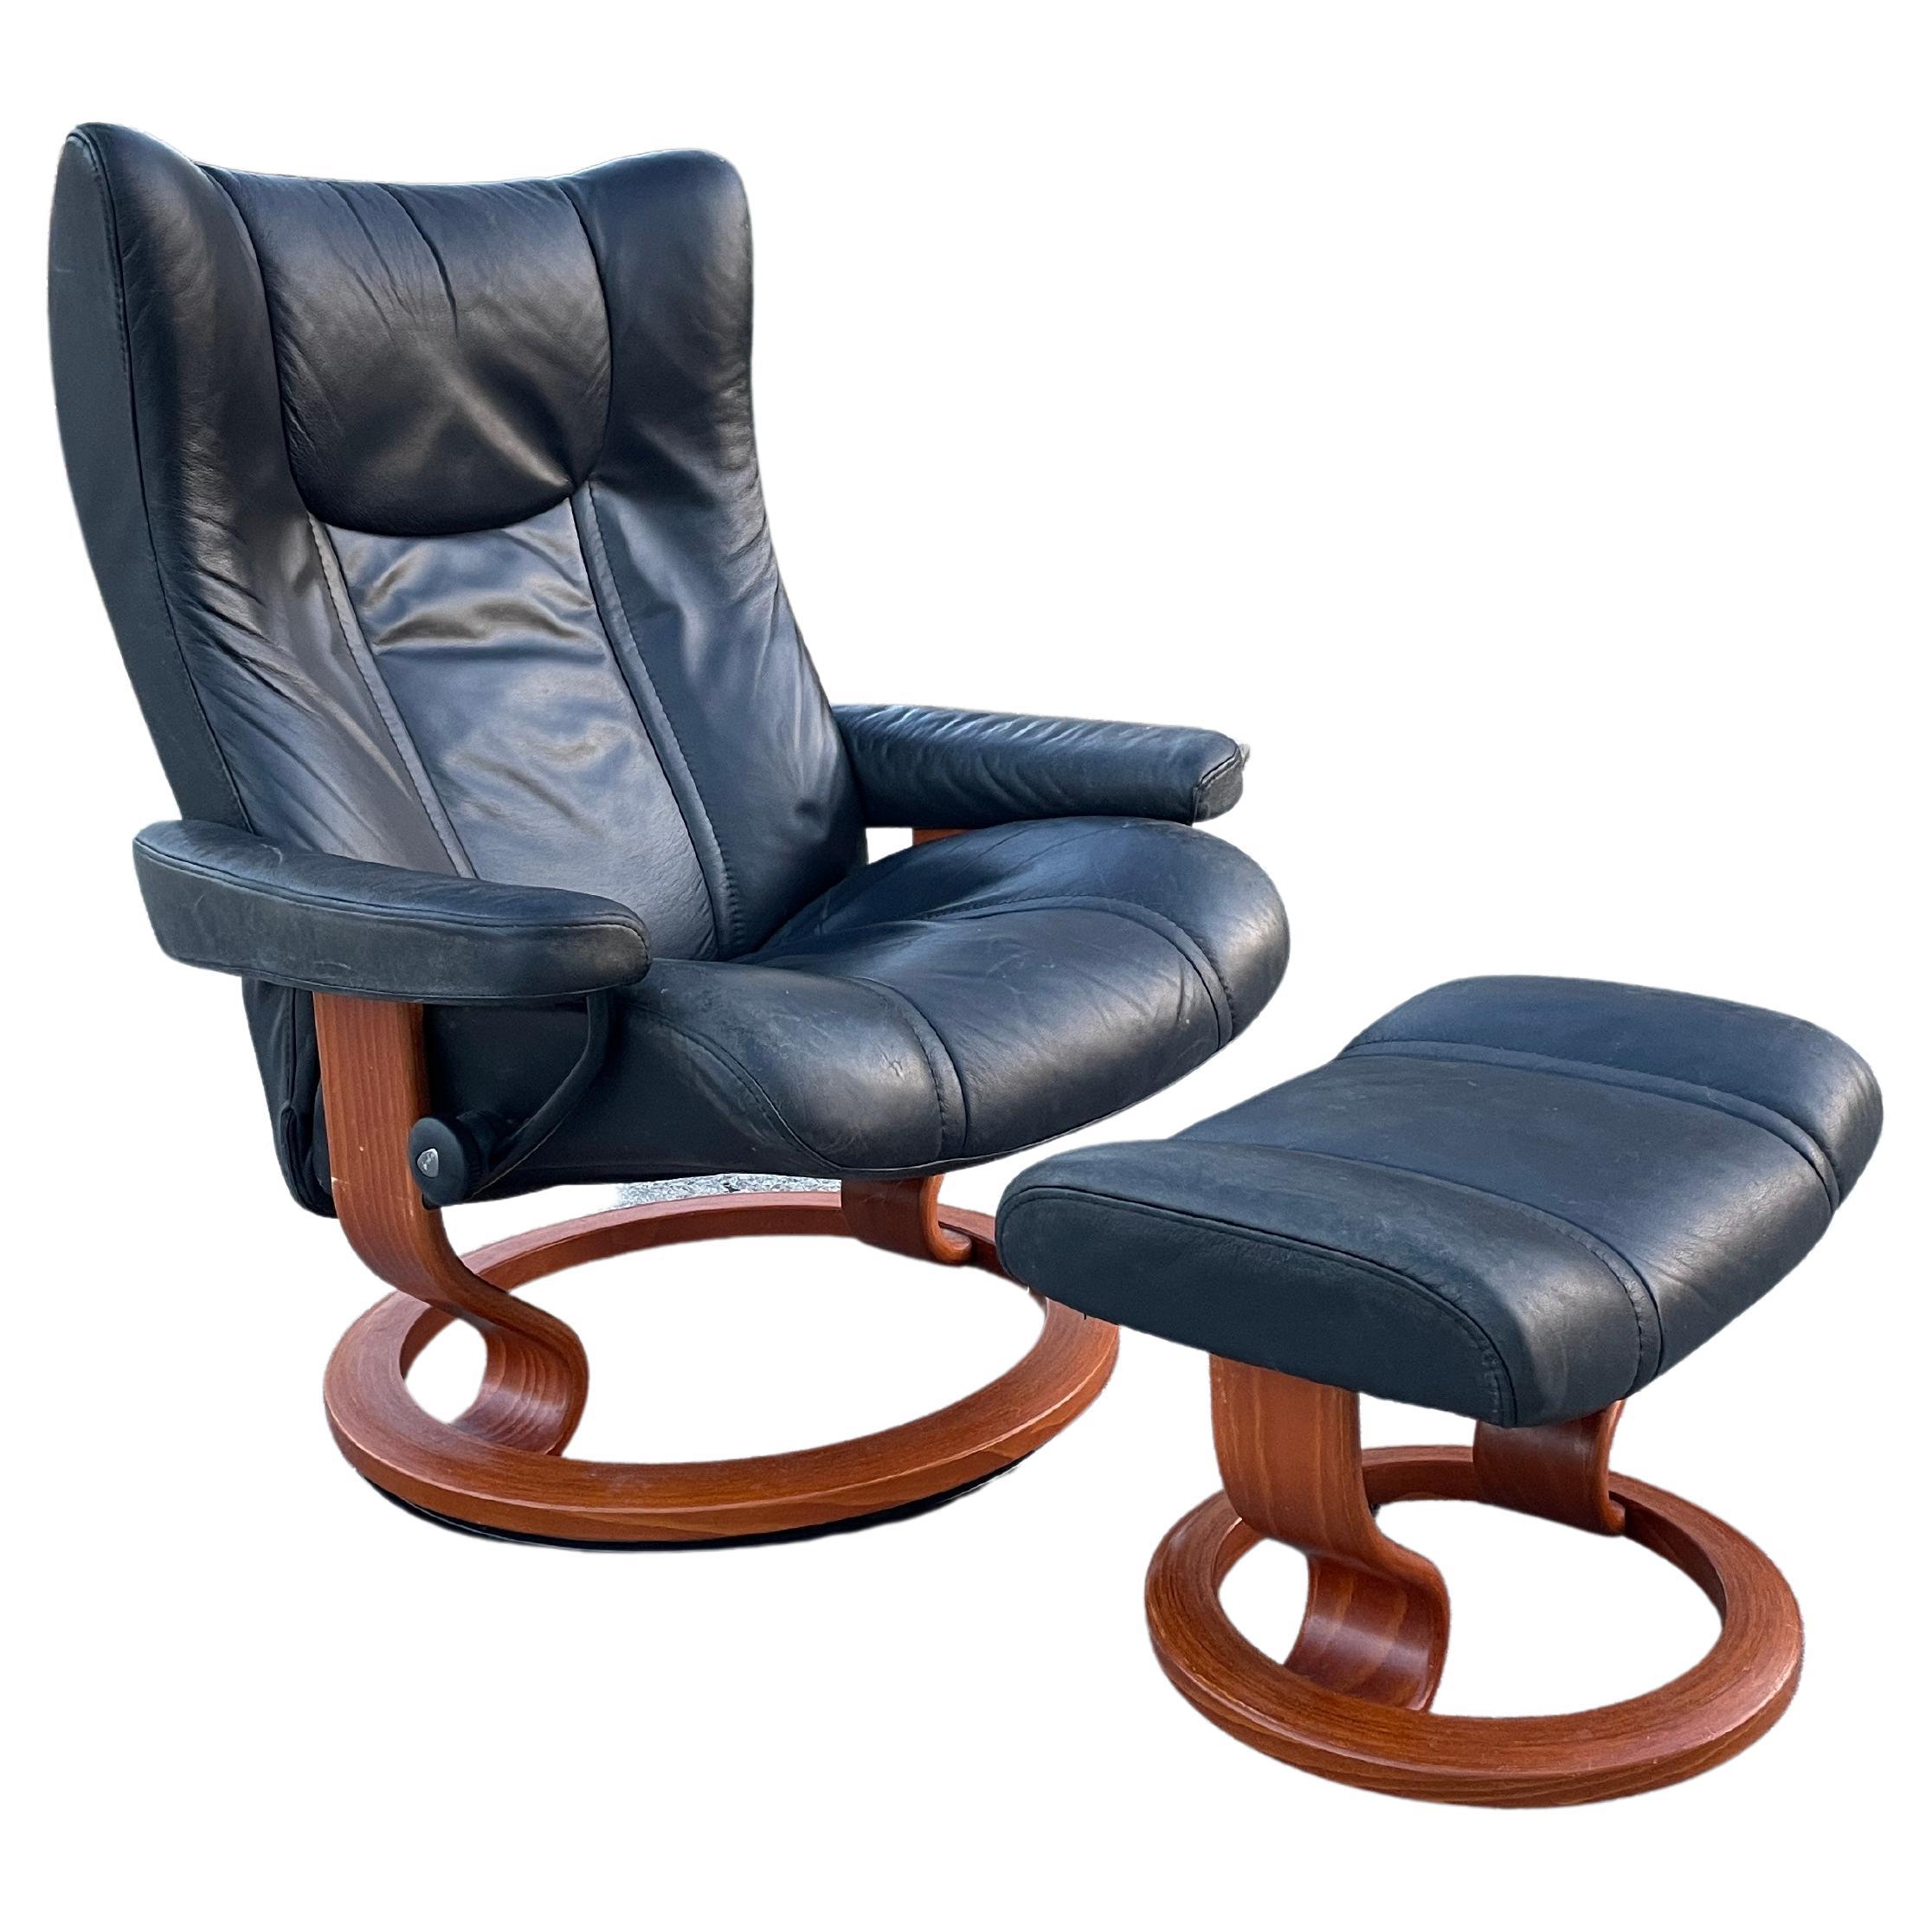 Ekornes Stressless Wingback Recliner Chair and Ottoman